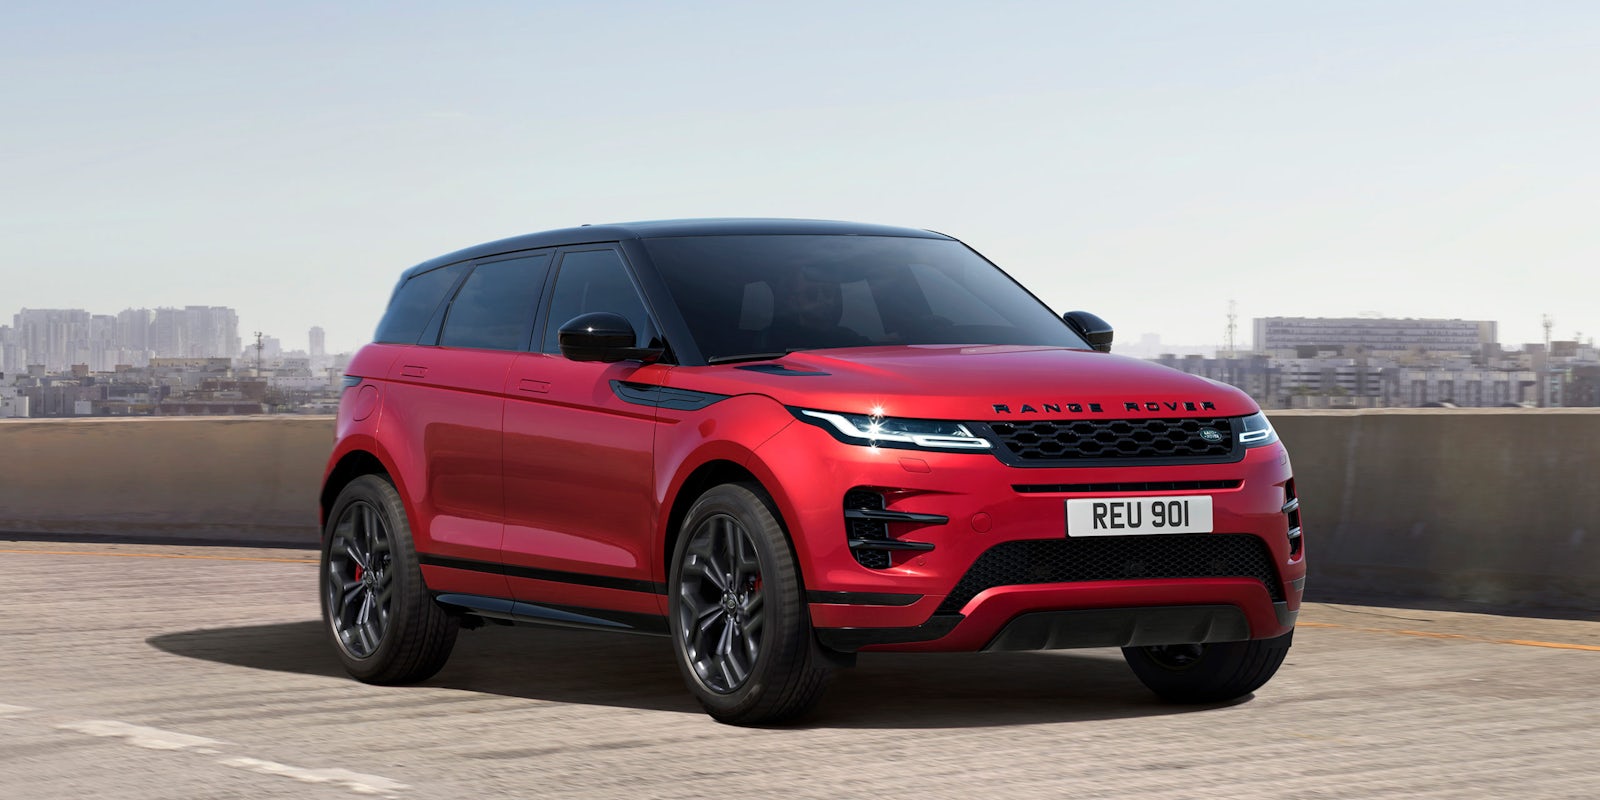 2021 Range Rover Evoque P300 Hst Revealed Price Specs And Release Date Carwow